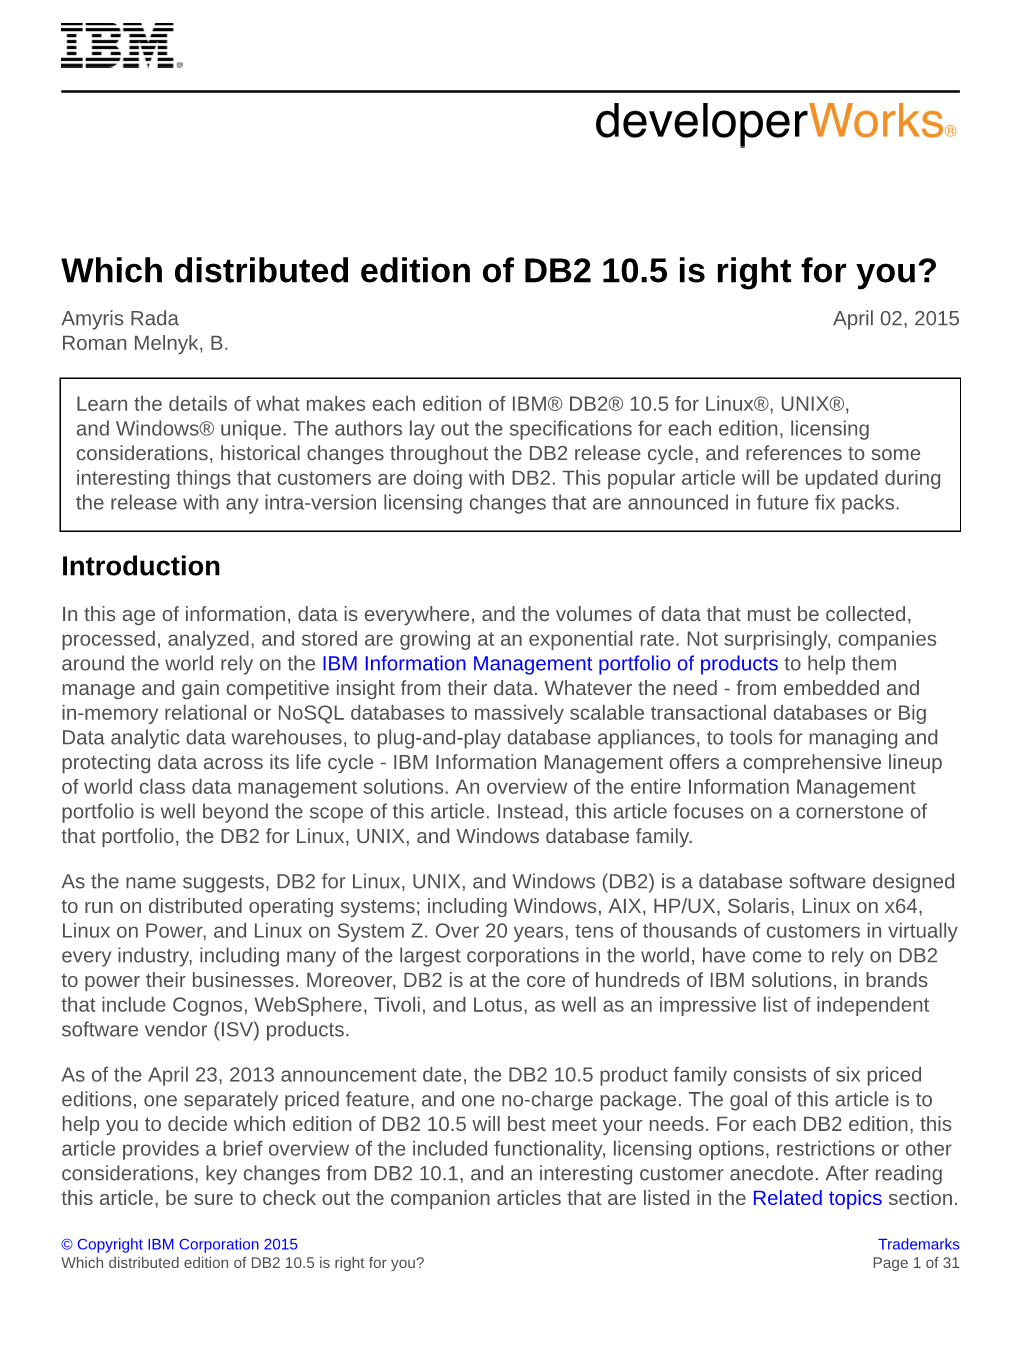 Which Distributed Edition of DB2 10.5 Is Right for You? Amyris Rada April 02, 2015 Roman Melnyk, B